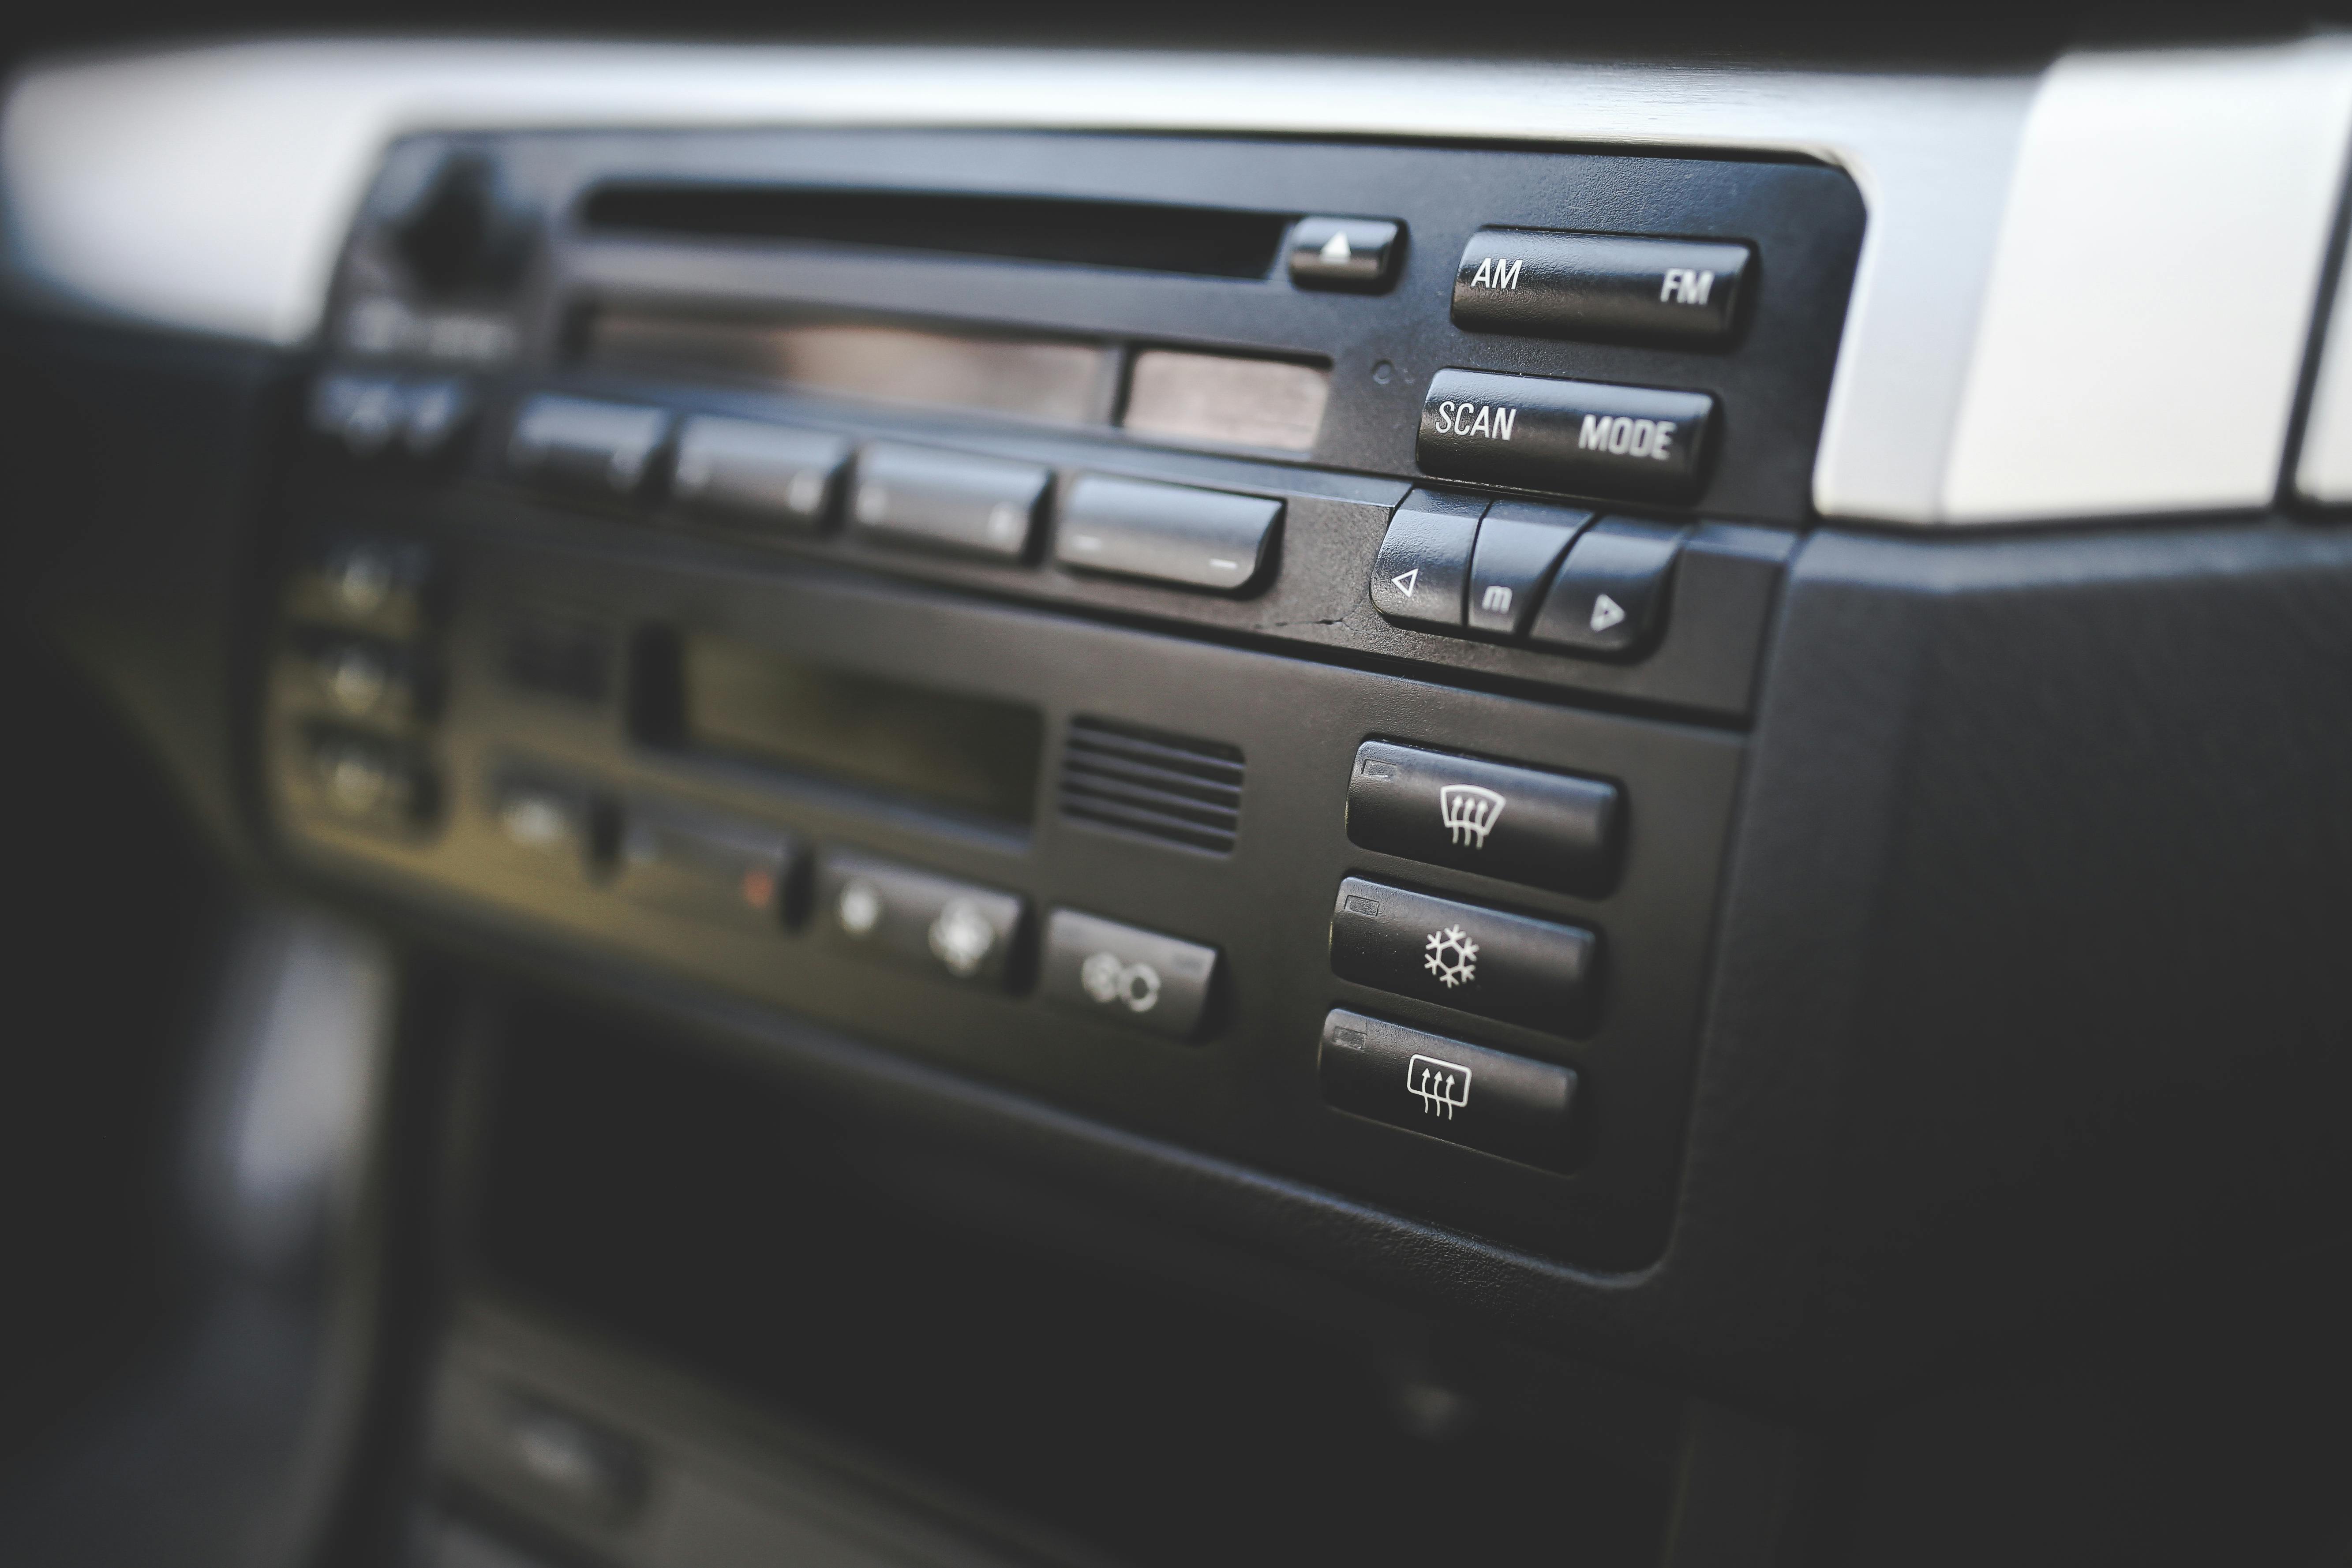 Car's Air Conditioner · Free Stock Photo